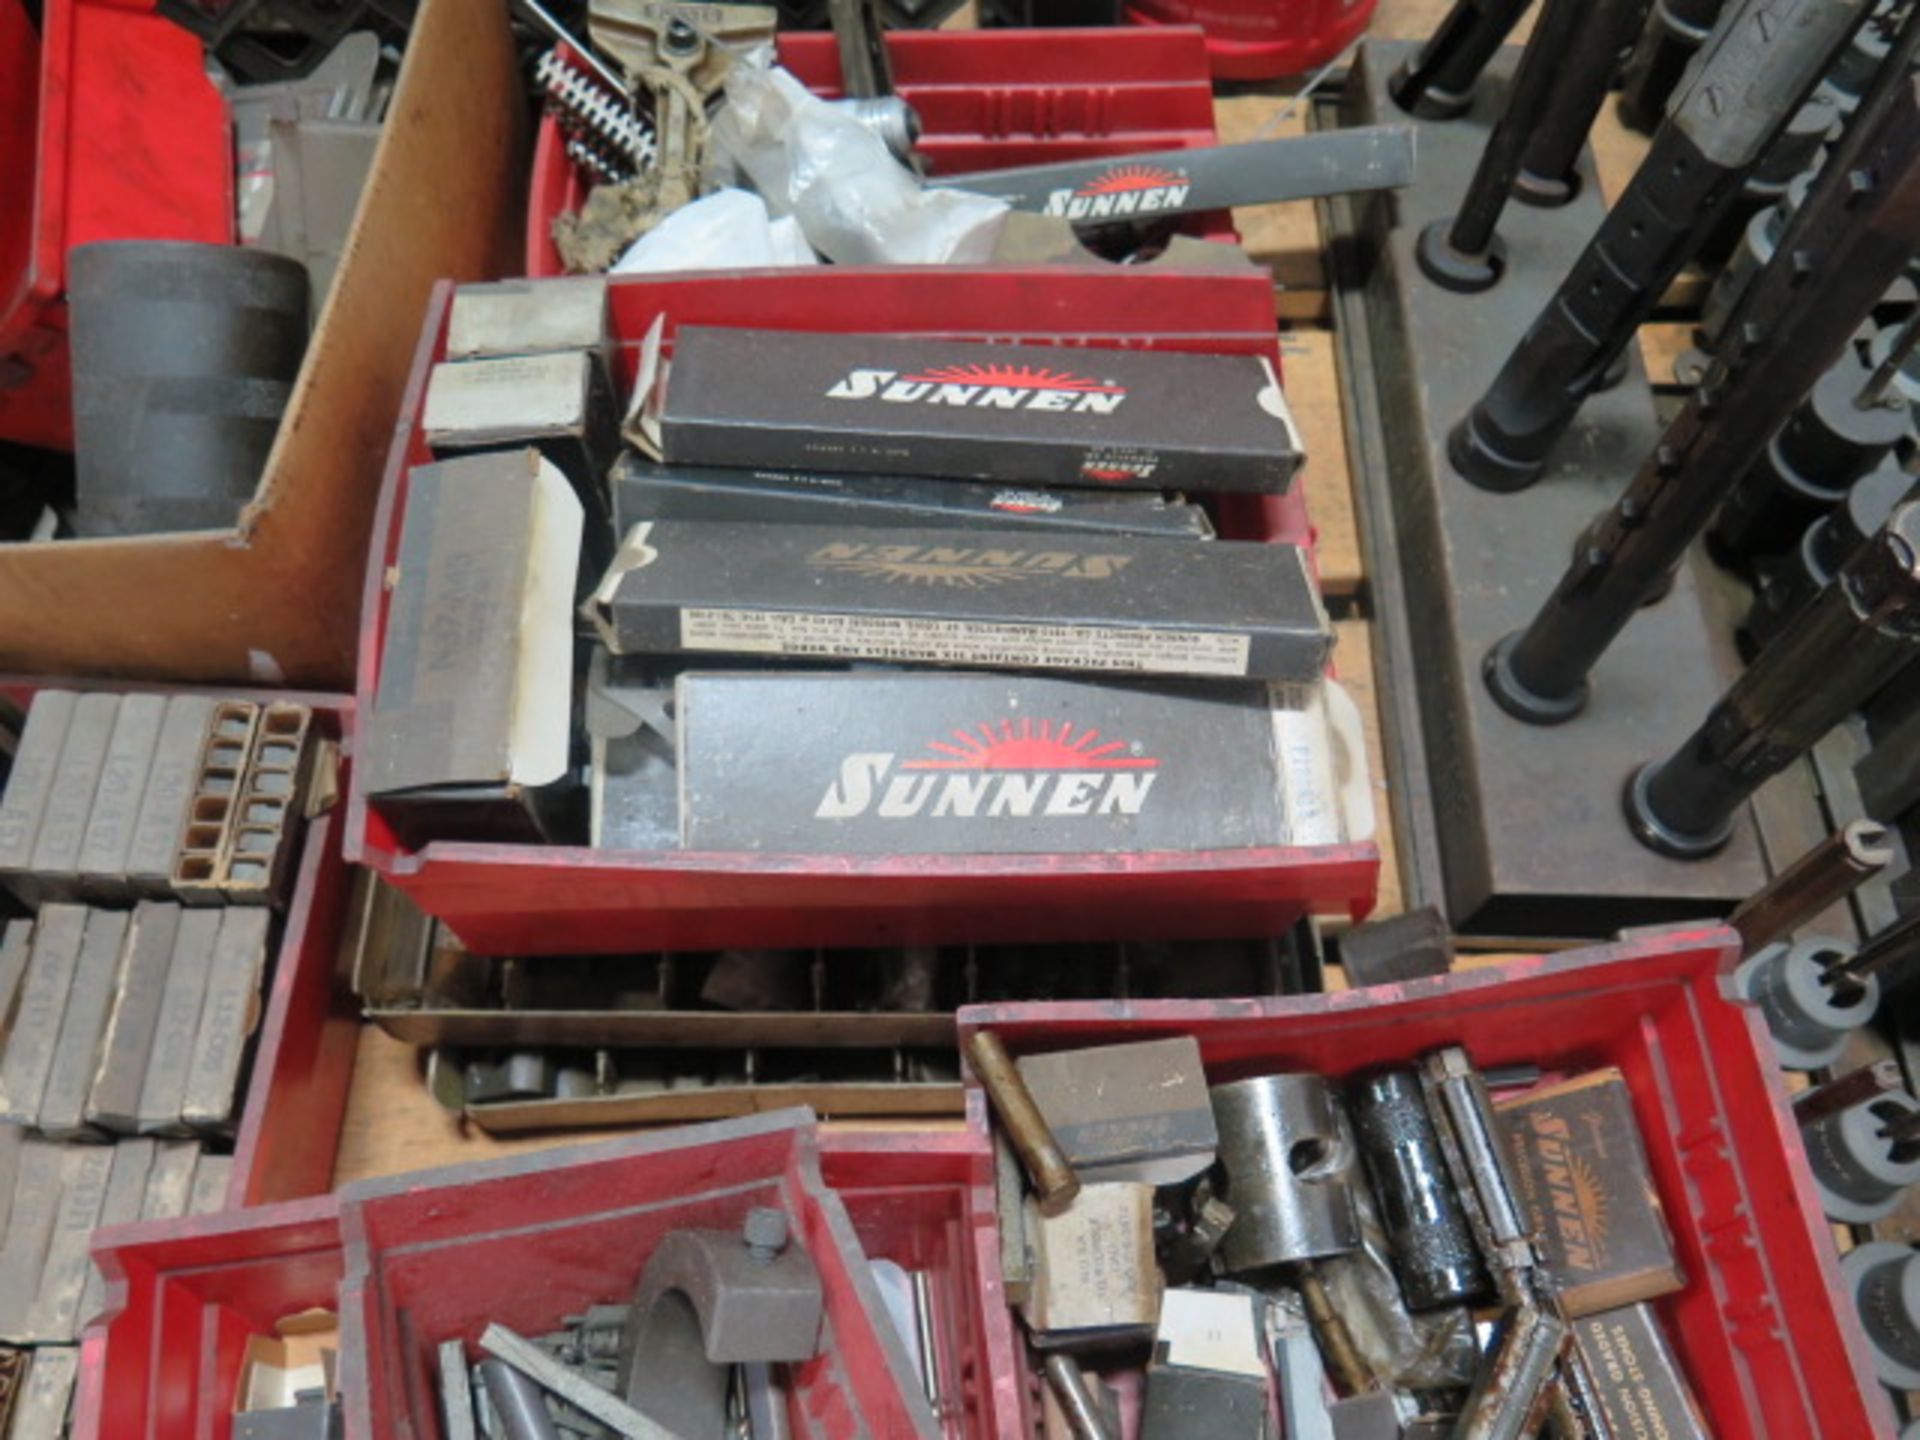 Large Quantity of Sunnen Honing Mandrels, Stones and Truing Sleeves (SOLD AS-IS - NO WARRANTY) - Image 4 of 6